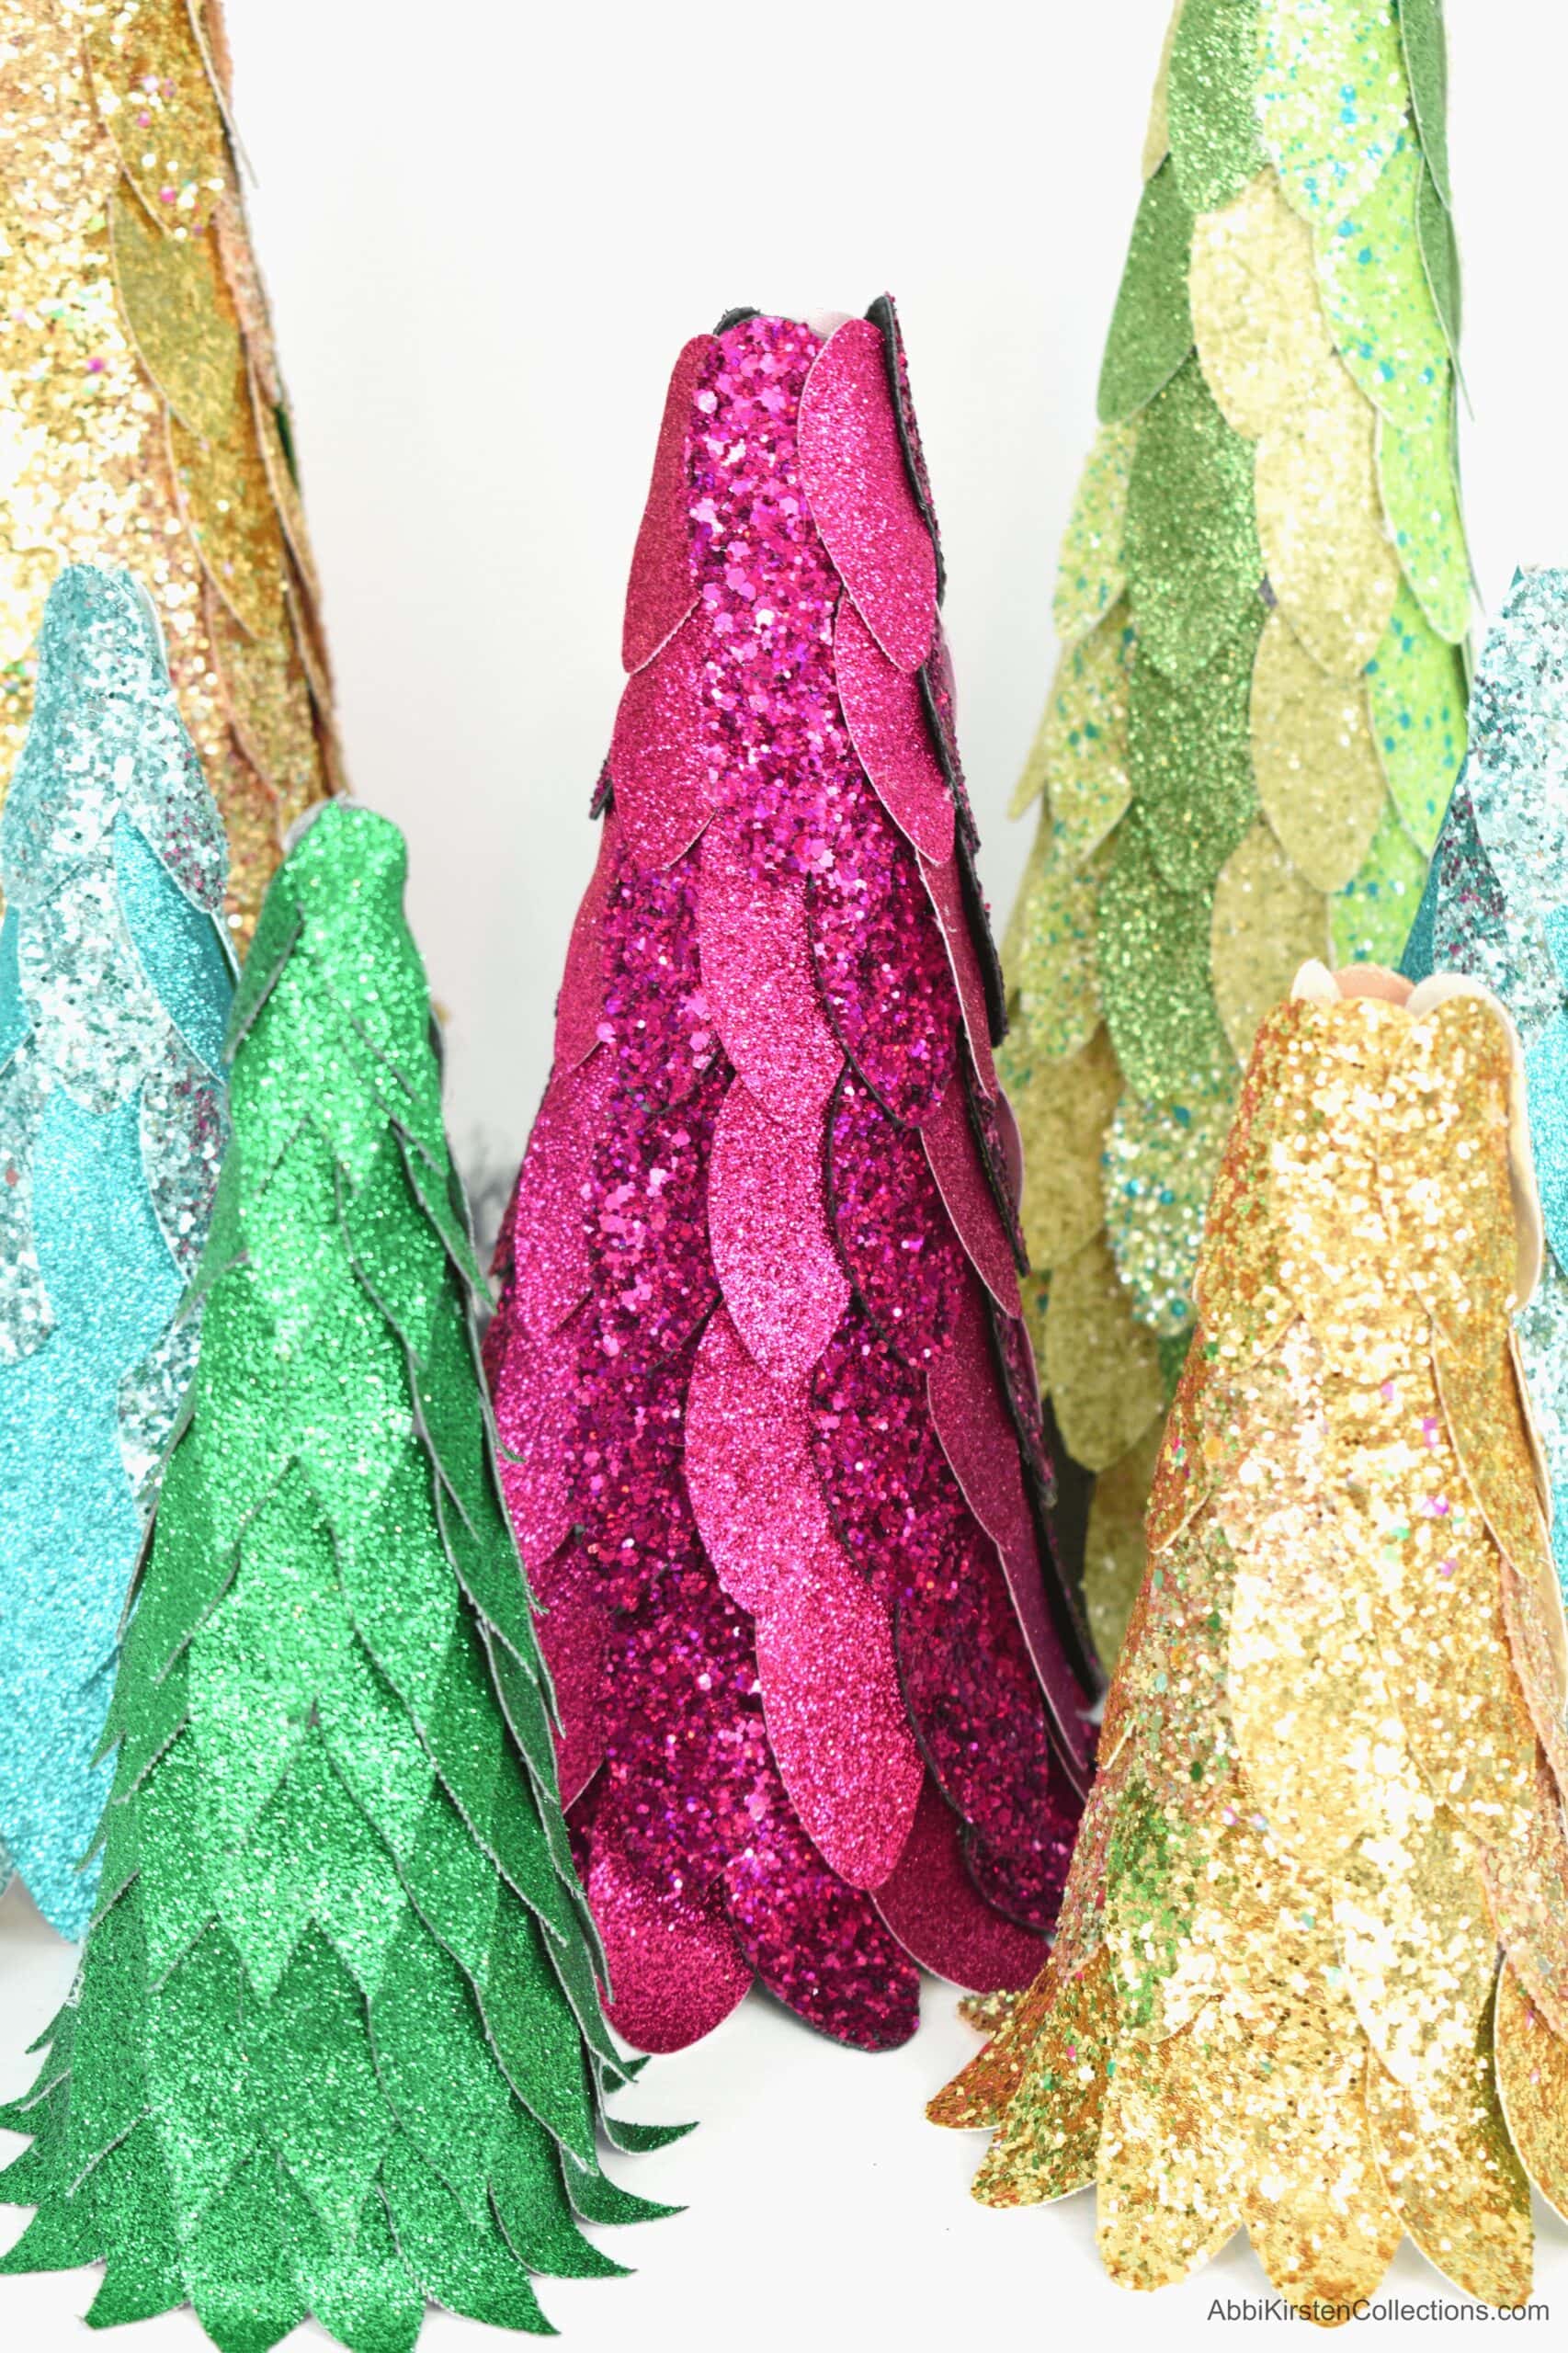 A close-up image of six completed faux leather glittery Christmas trees, each a different height and color. These leather Christmas trees are an easy Christmas decor DIY for your home!